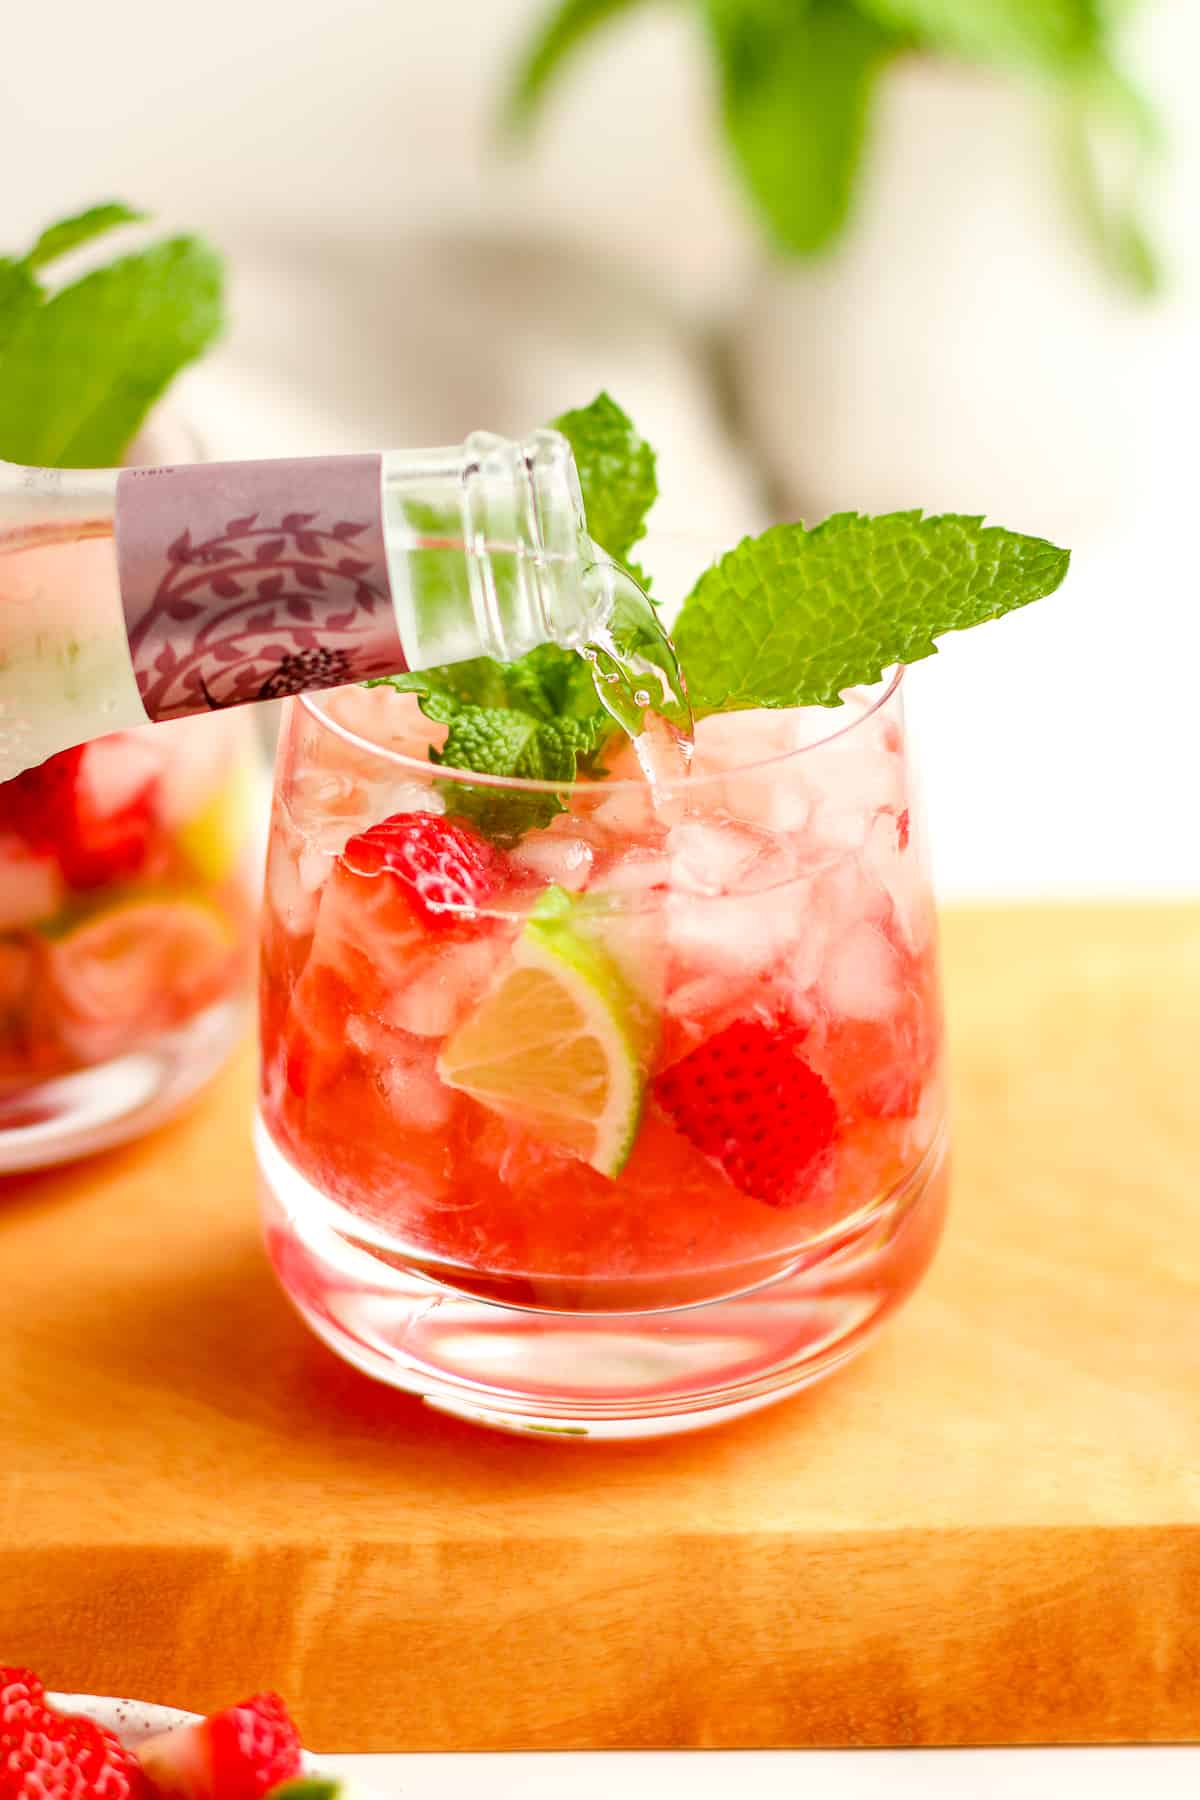 The club soda being added to the glass of strawberry mojitos.